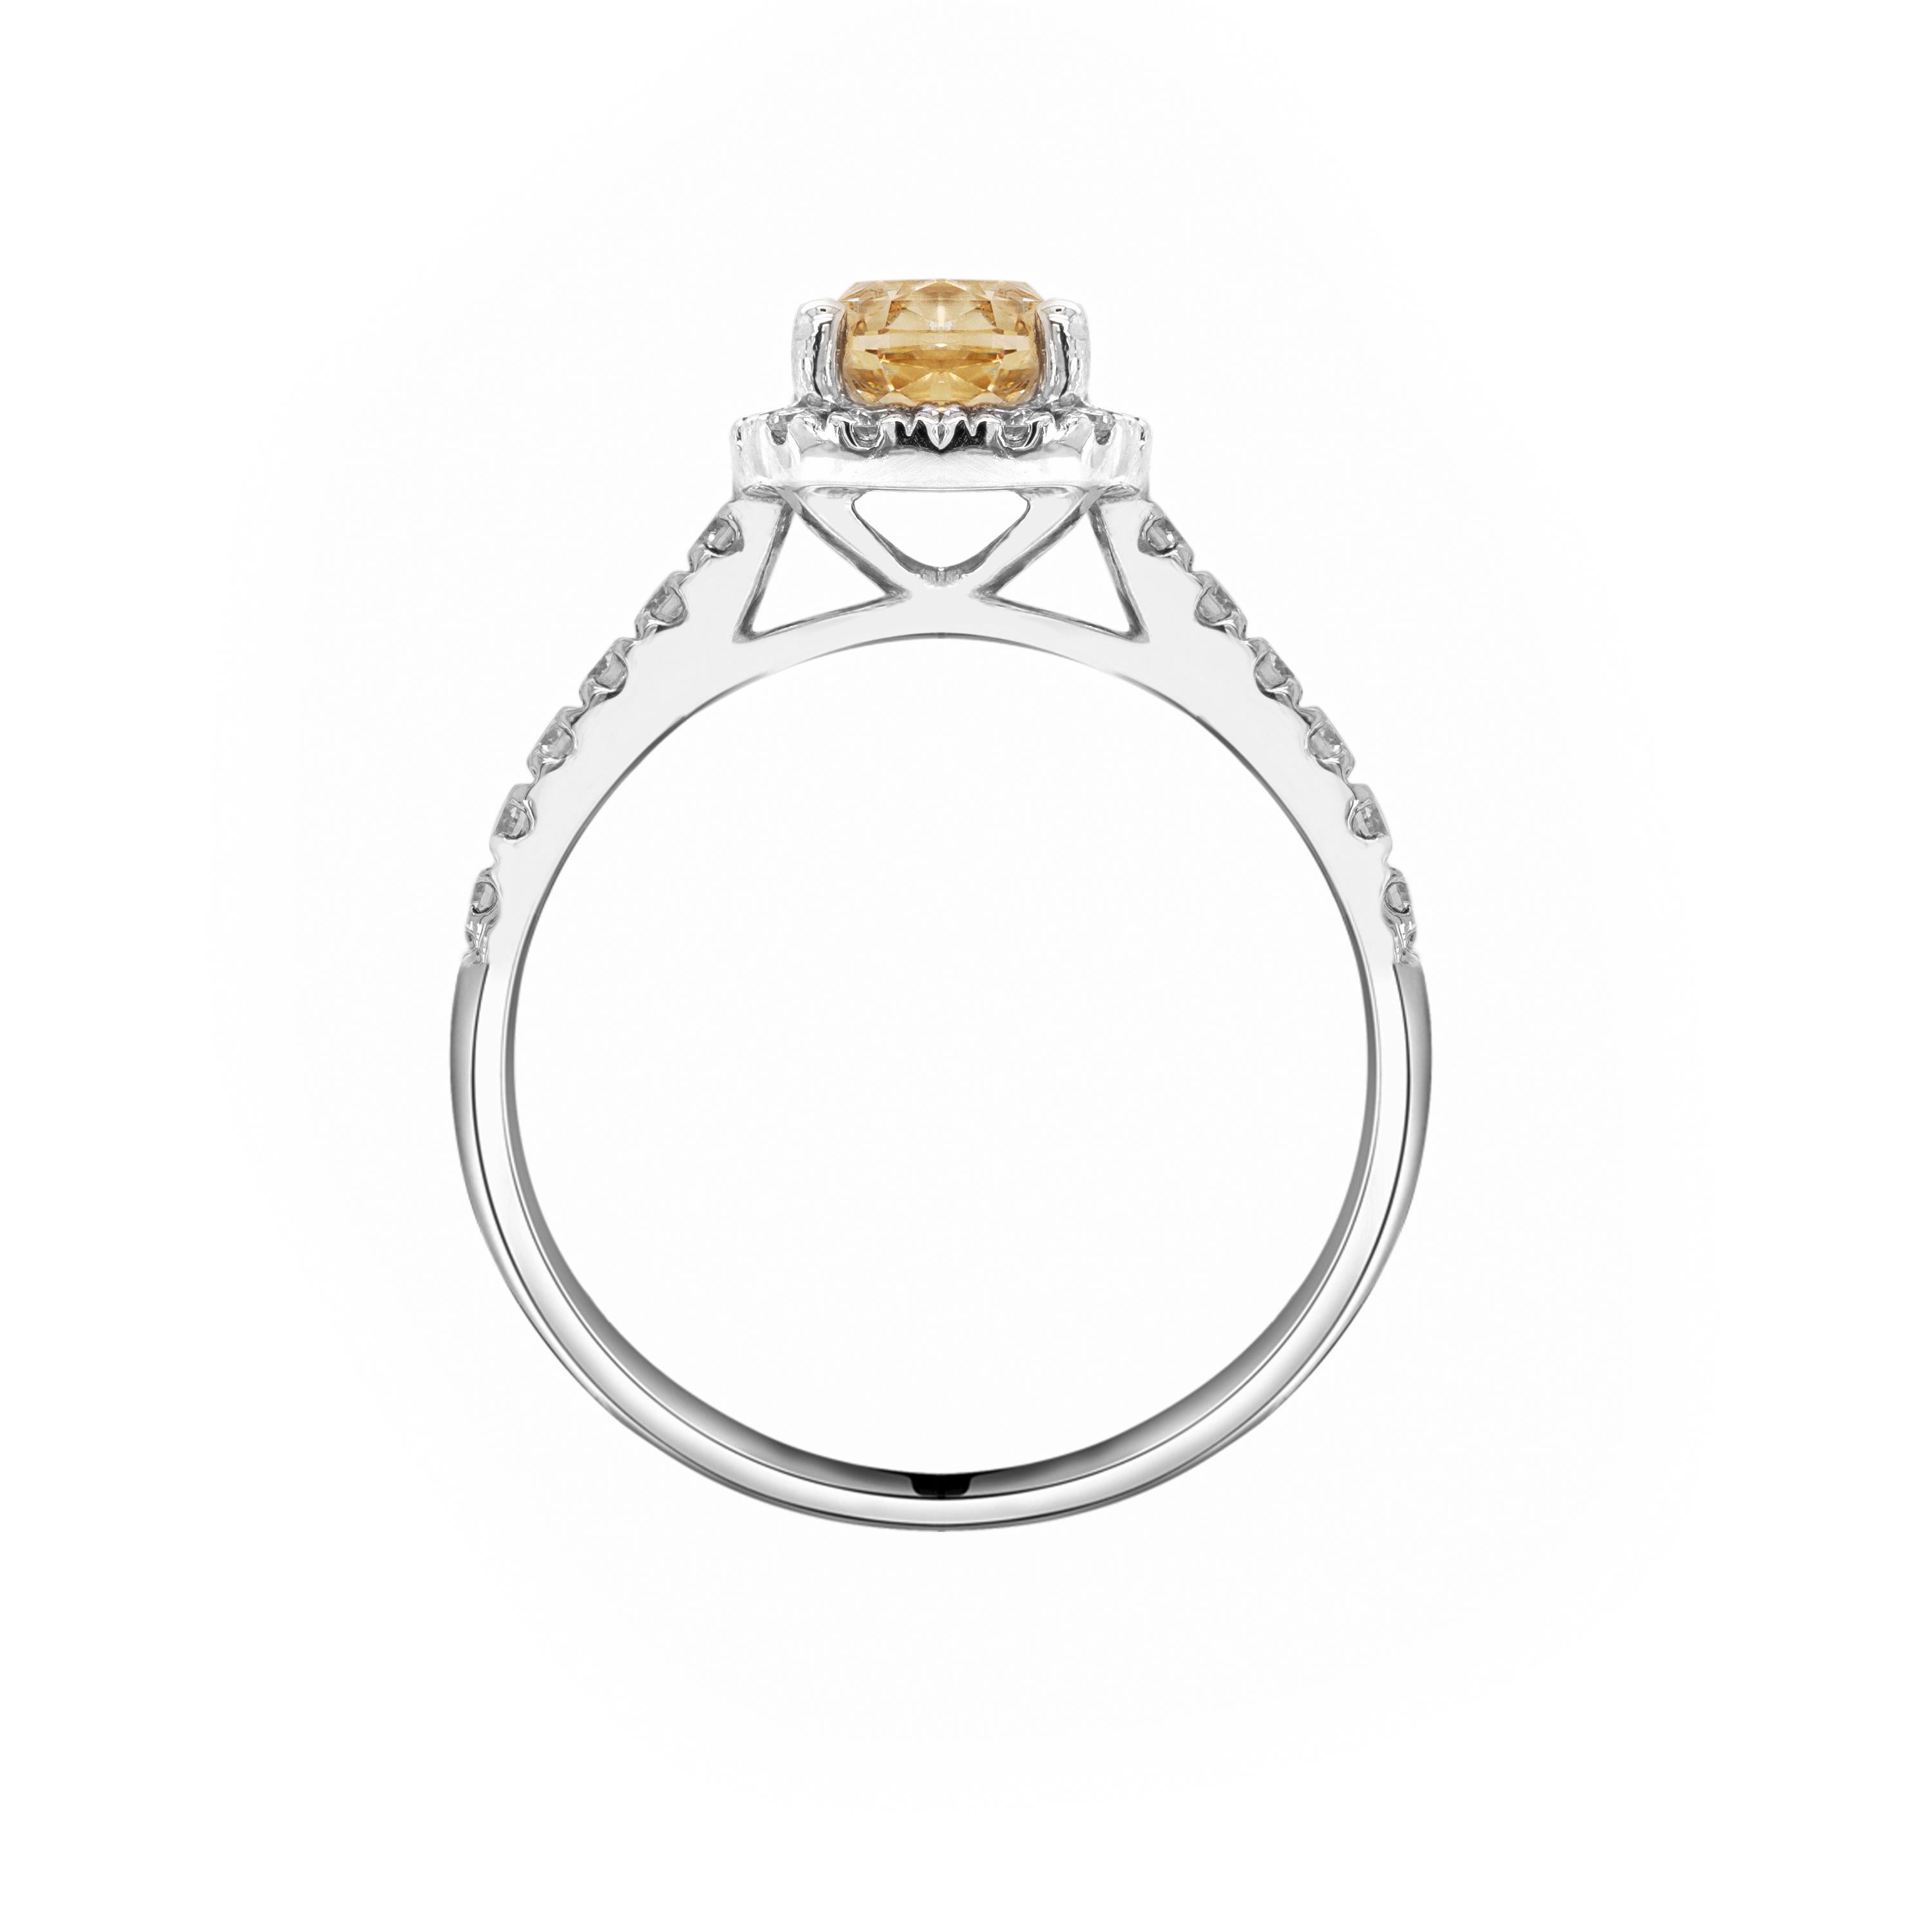 This stunning engagement ring features a champagne coloured cushion cut diamond weighing 1.20ct mounted in a four claw, open back setting. The gorgeous stone is surrounded by a halo of white round brilliant cut diamonds to give a wonderful contrast